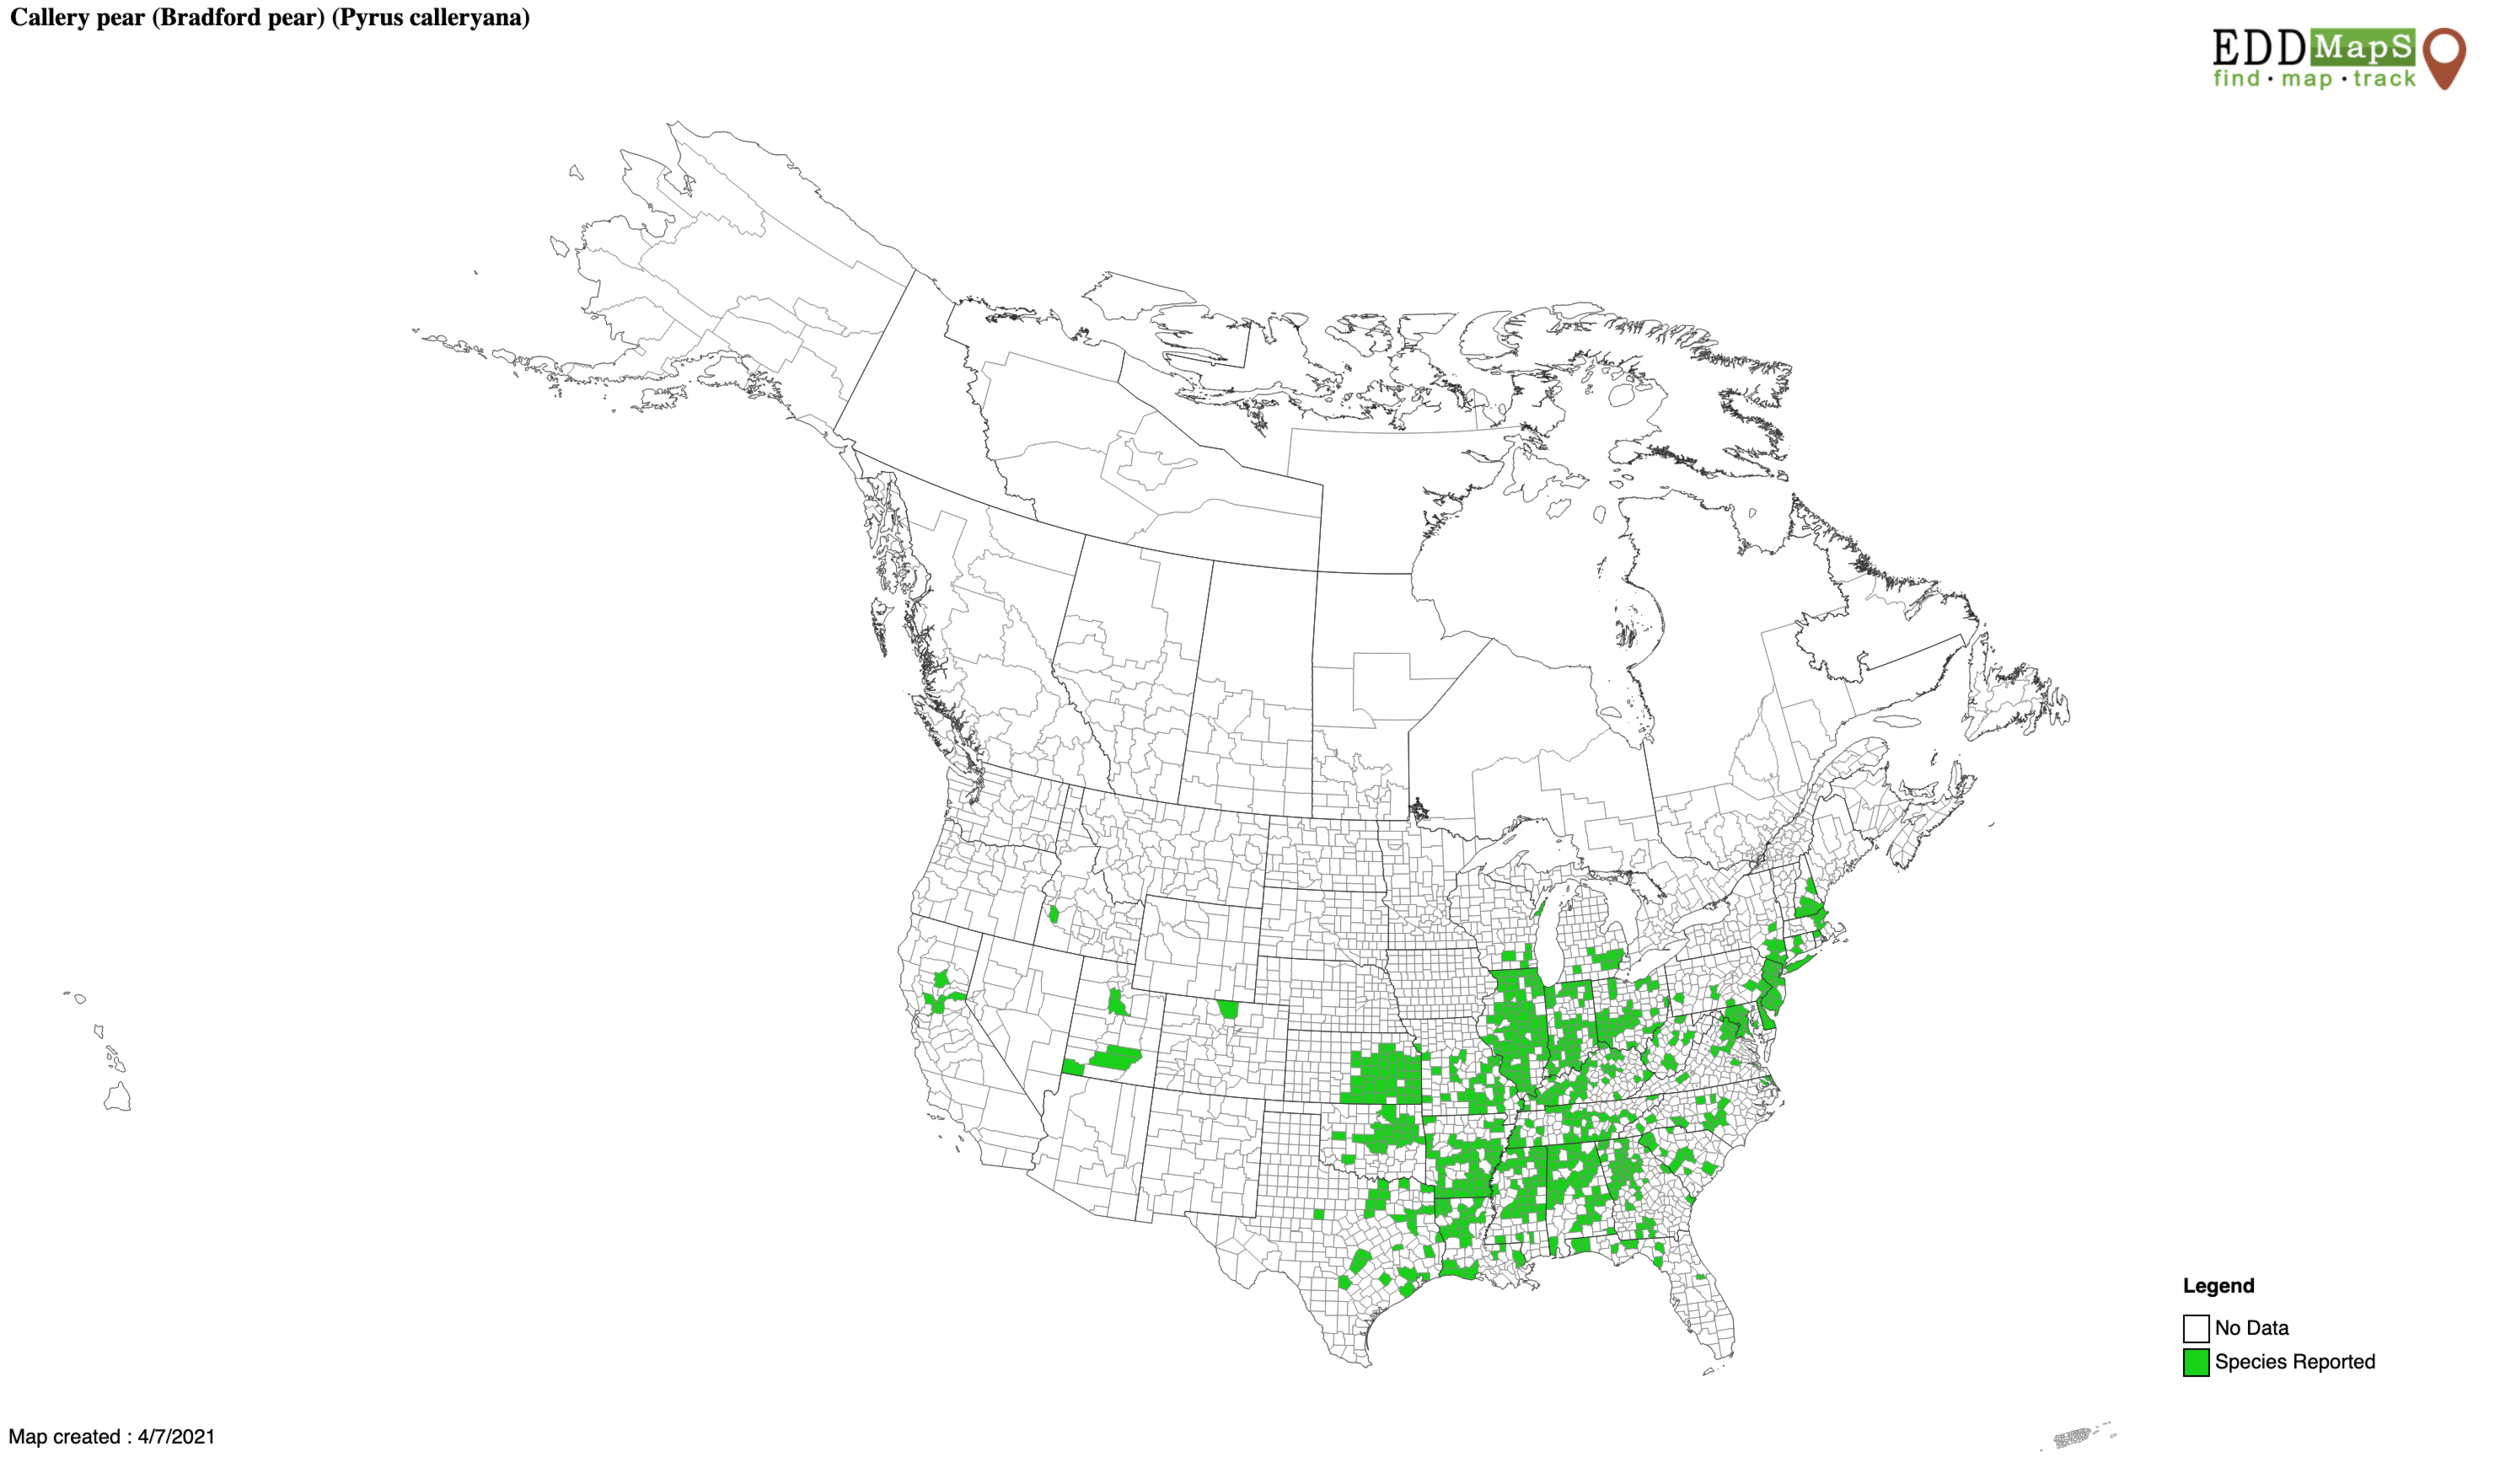 Callery pear distribution 